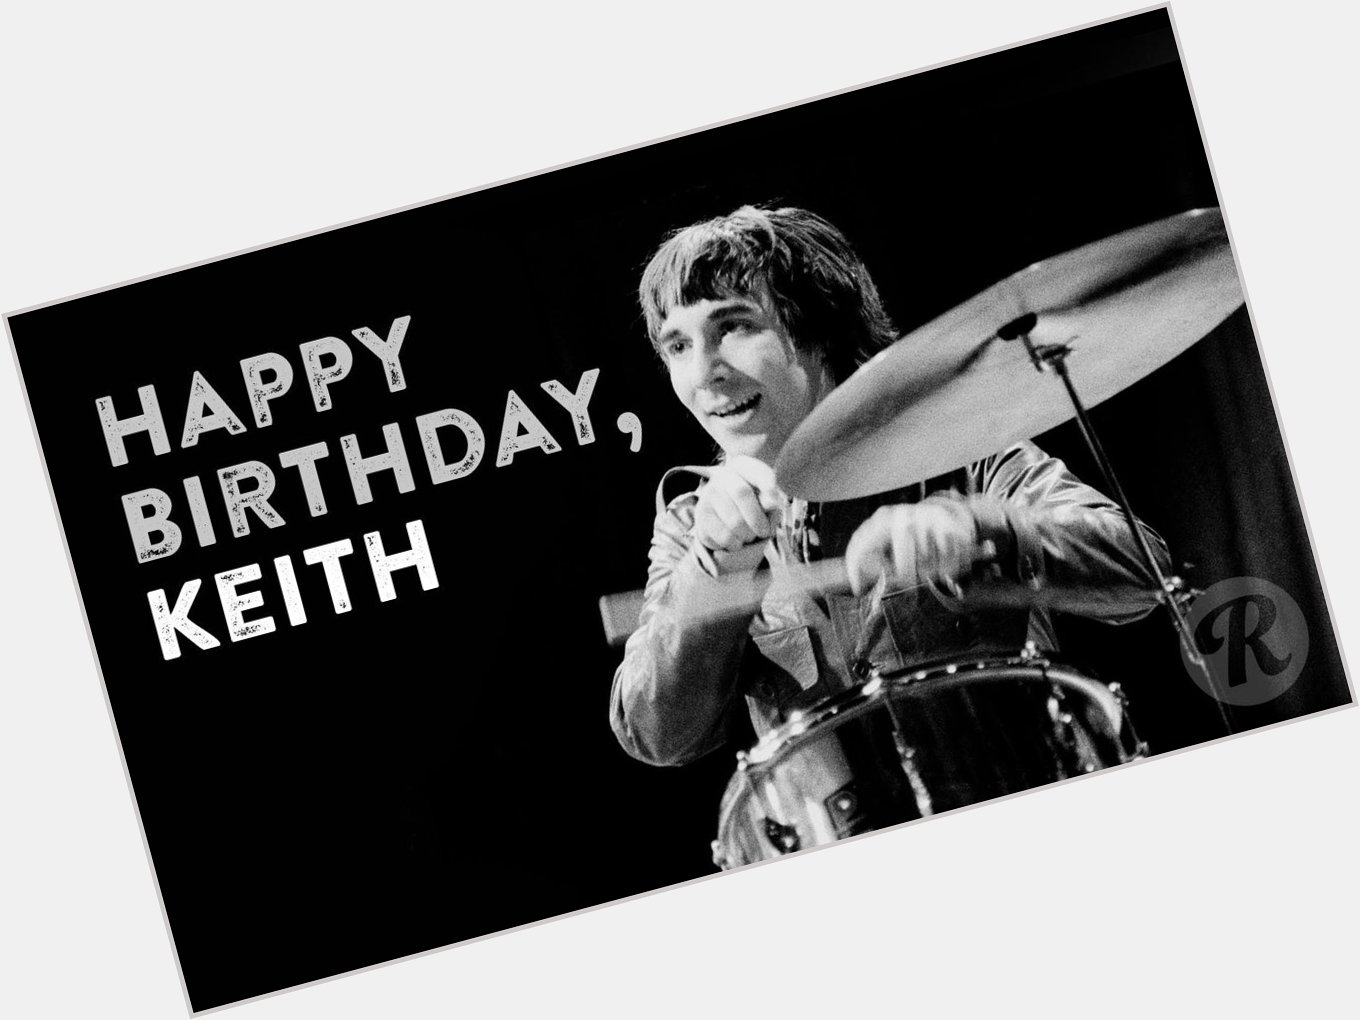 Happy birthday Keith Moon! One of the greatest drummers of all time. Few have gone harder before or since you left us 